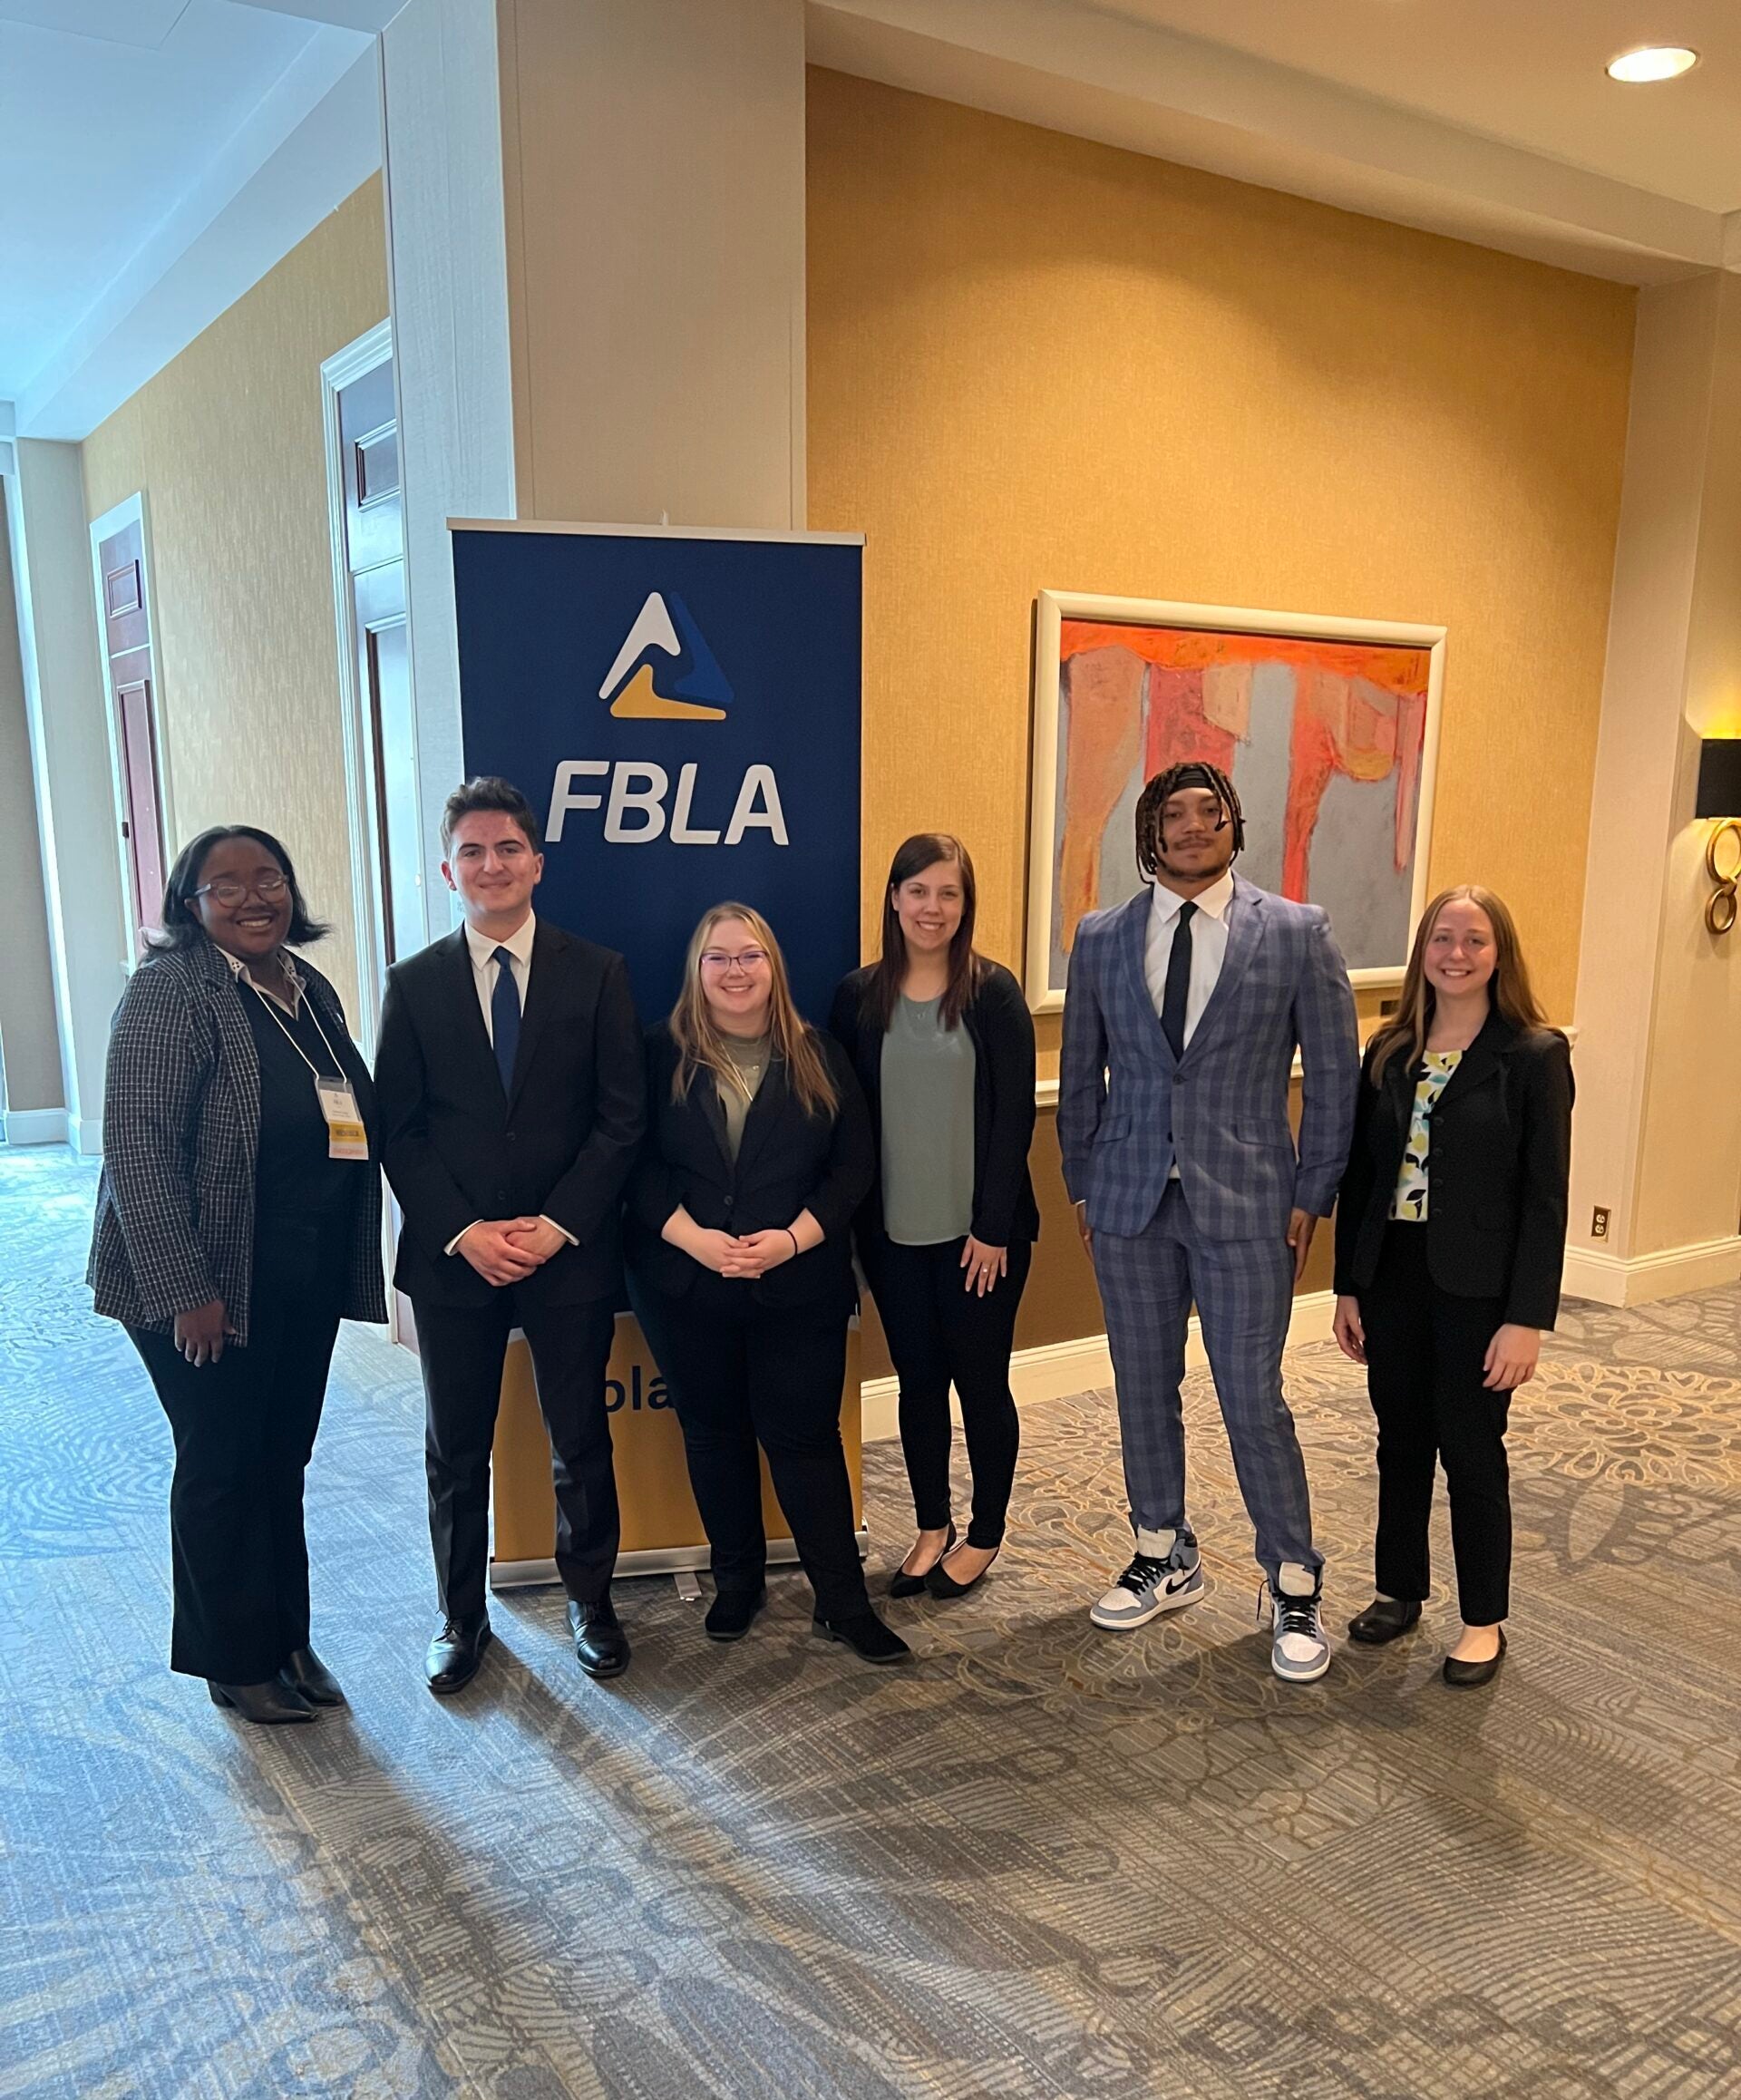 LVC students at Future Business Leaders of America (FBLA) event